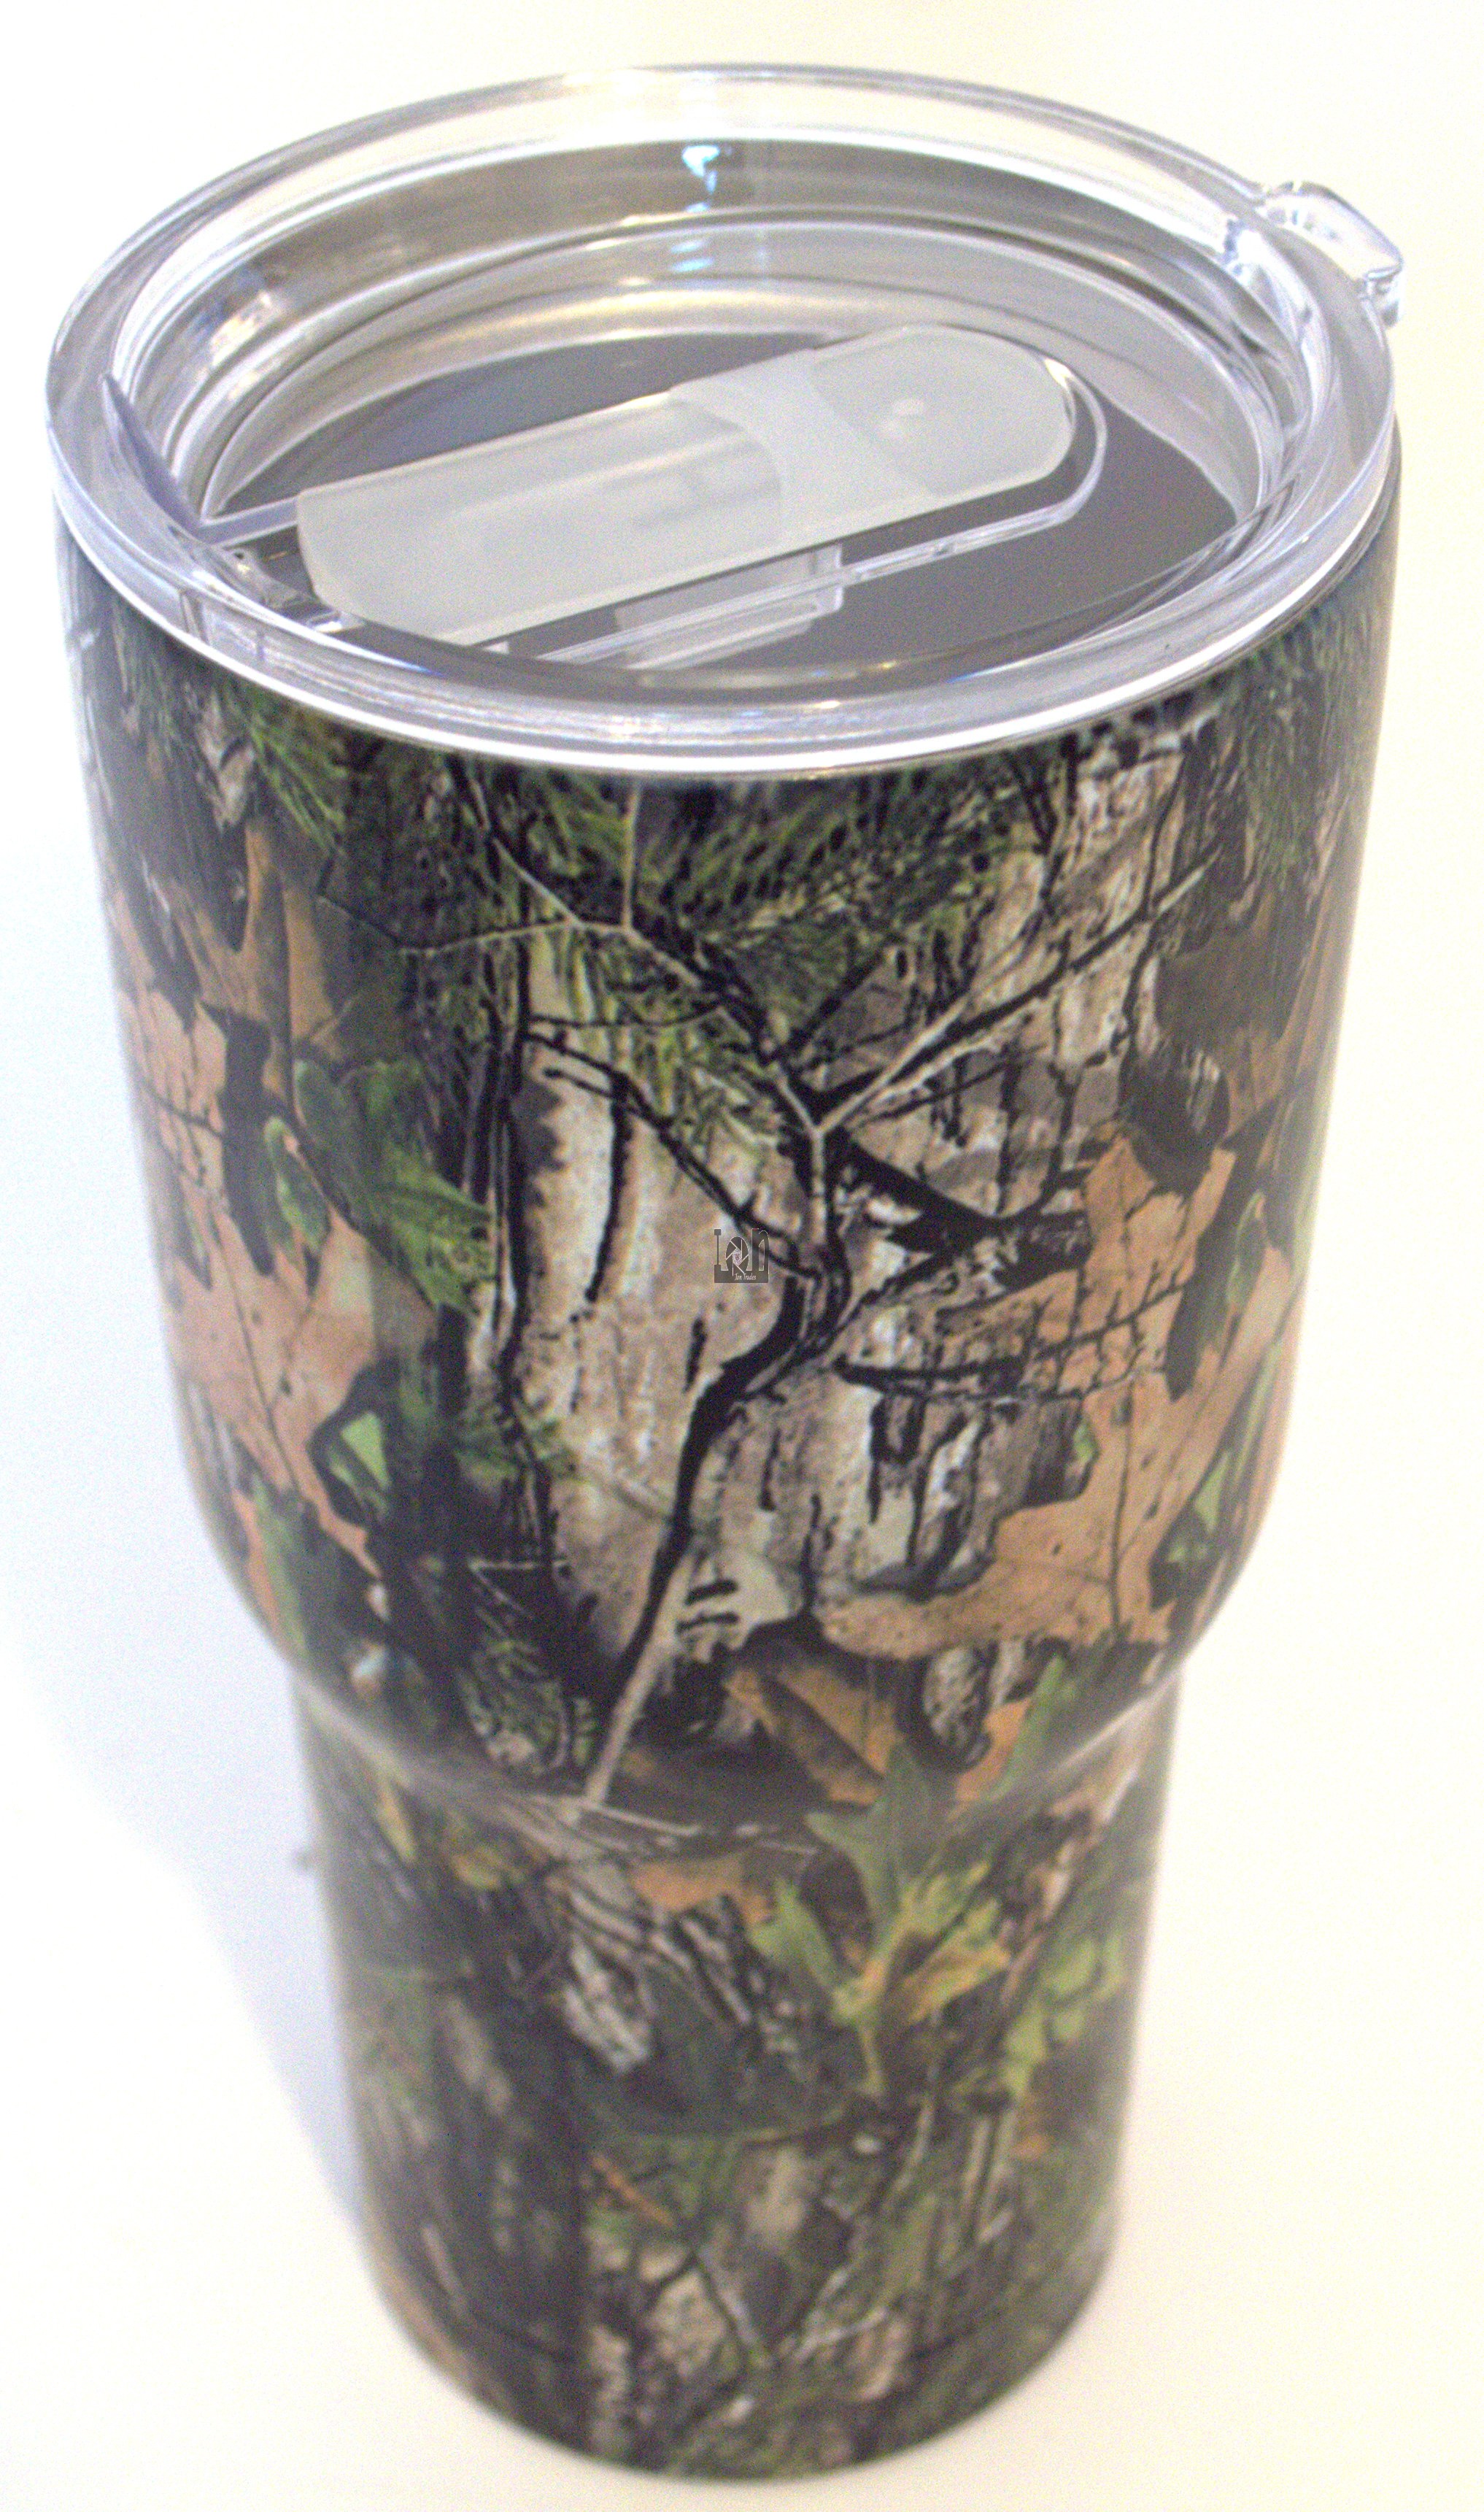 30oz Stainless Steel Thermos Tumbler Coffee Container Camo Print